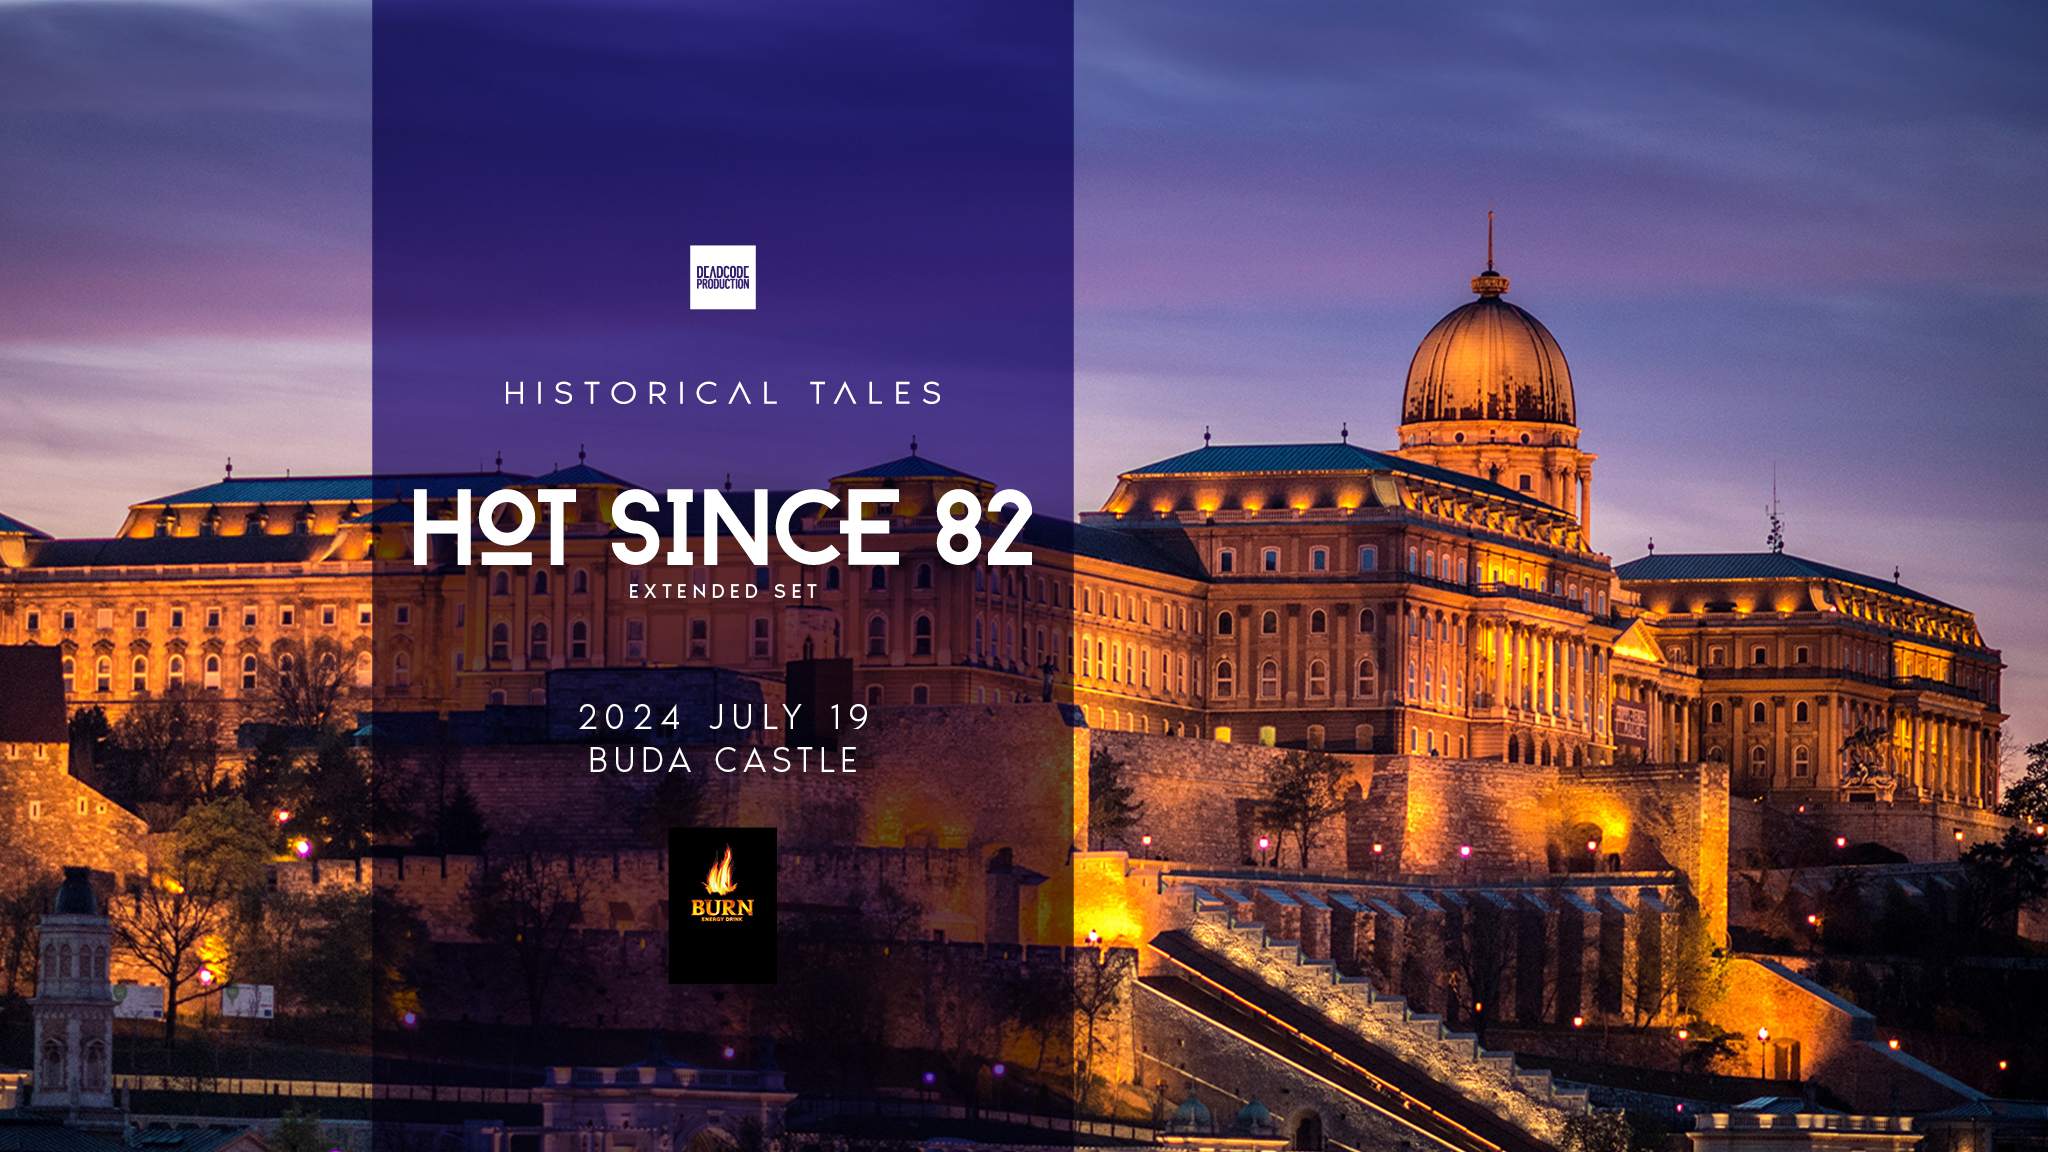 Historical Tales with Hot Since 82 at Buda Castle - フライヤー表